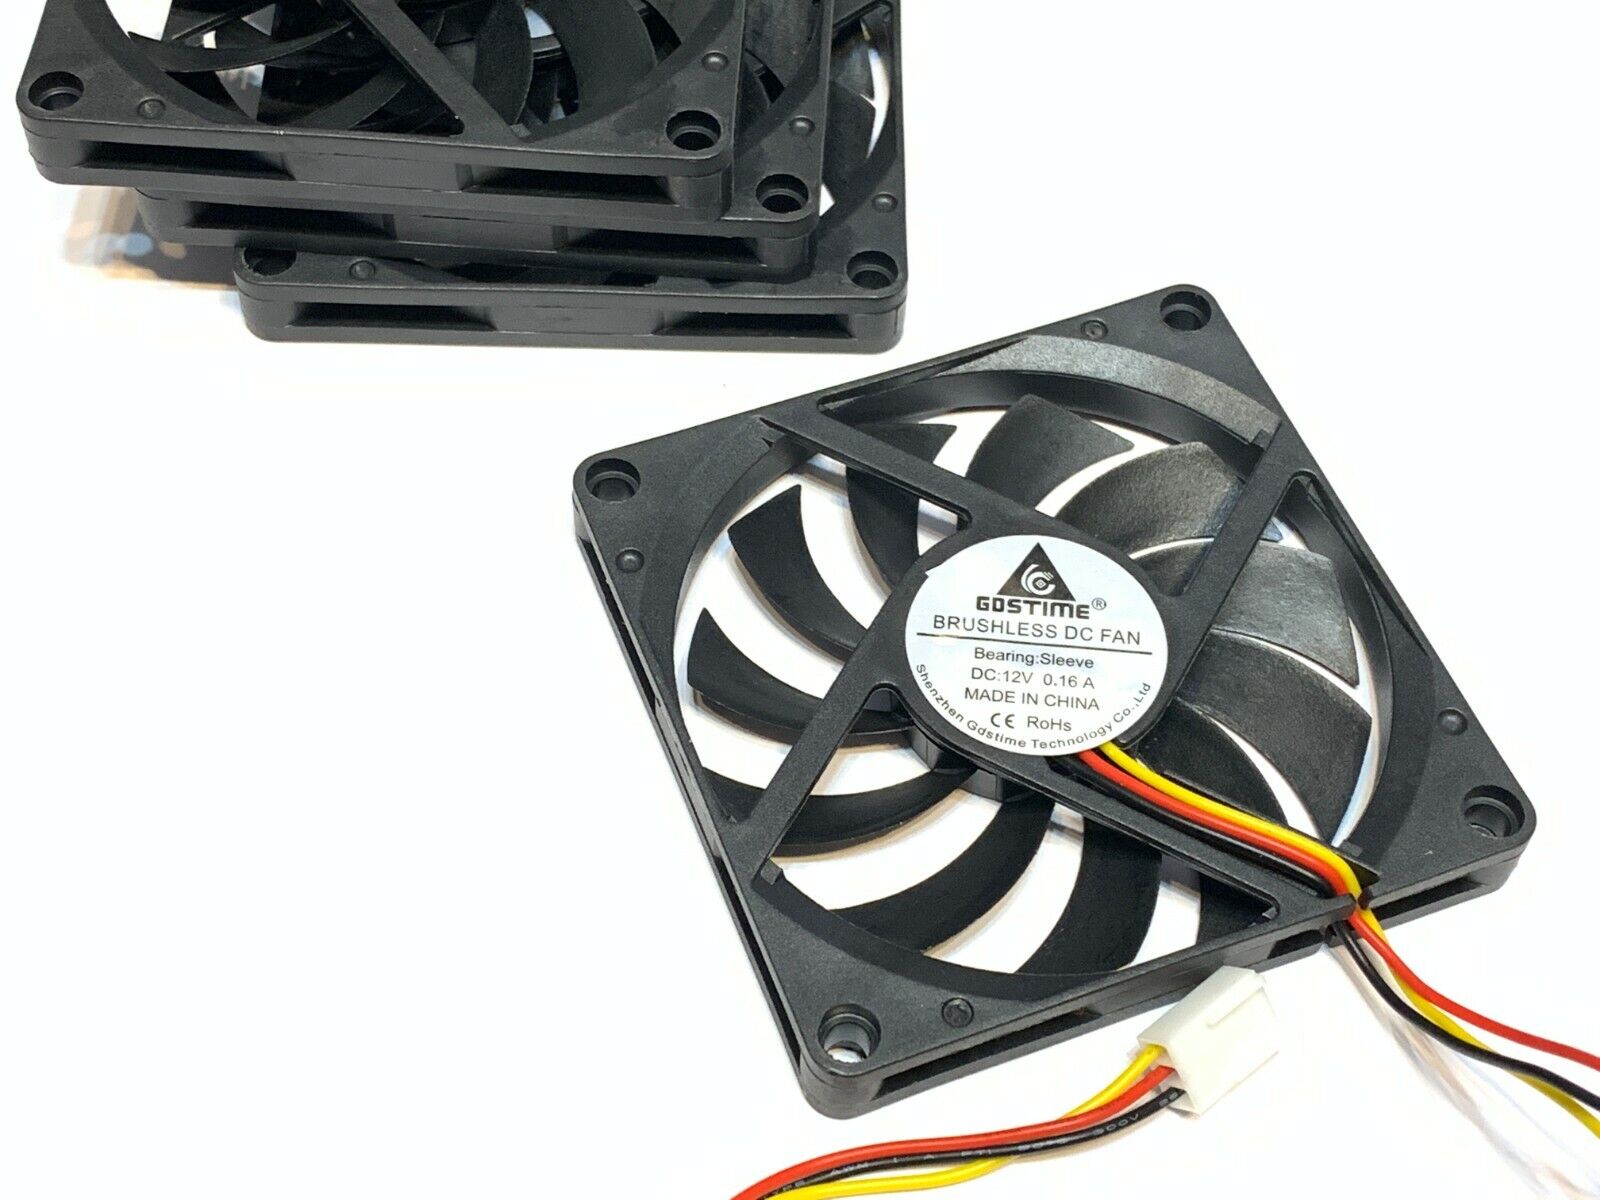 4 Pieces 8010 Gdstime 12V 3pin 80x80x10mm 8cm DC Cooling Fan large brushless